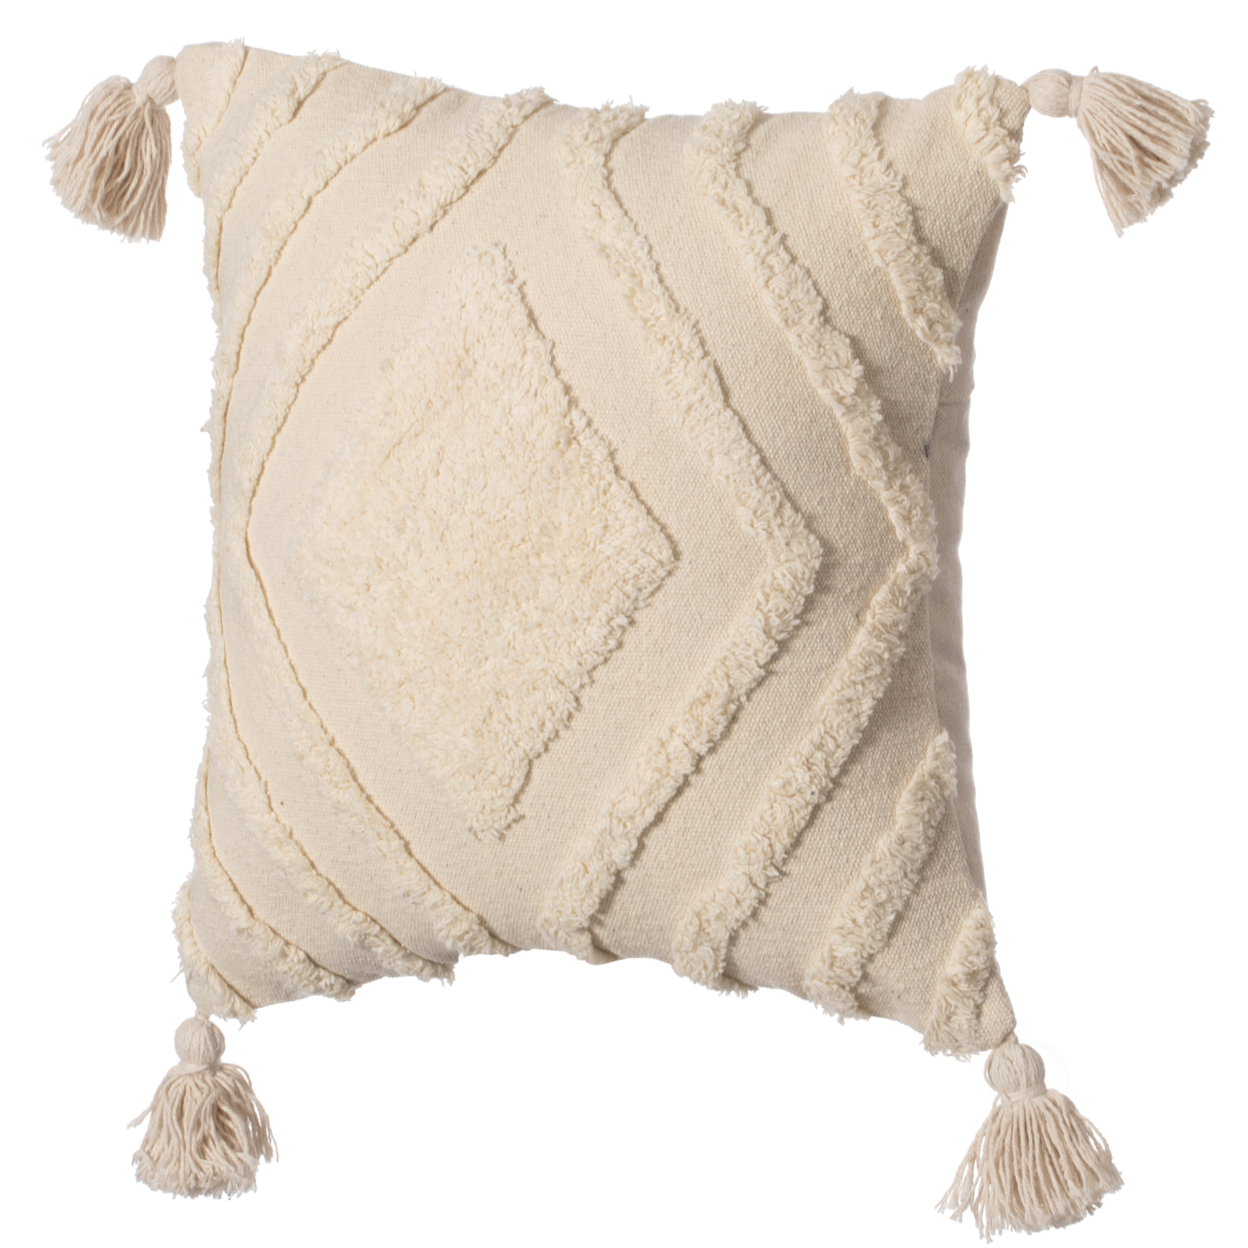 16 Handwoven Cotton Throw Pillow Cover With White On White Tufted Design And Tassel Corners - Chevron